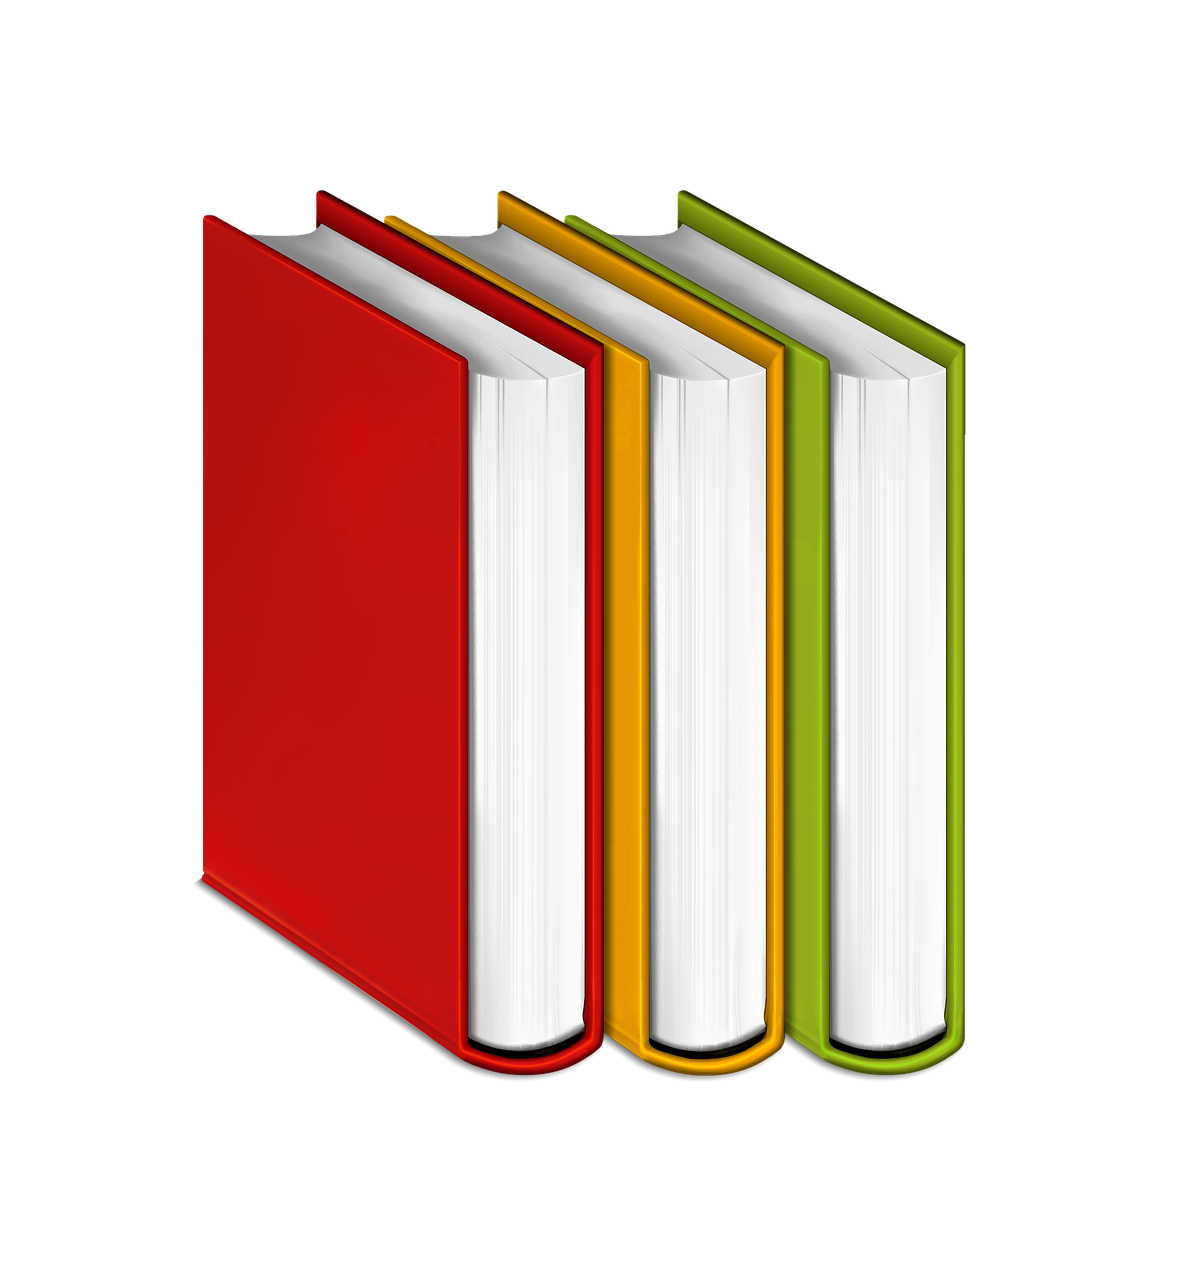 a stack of books sitting on top of each other, a digital rendering, figuration libre, on a flat color black background, red-yellow colors, cookbook photo, high detail illustration